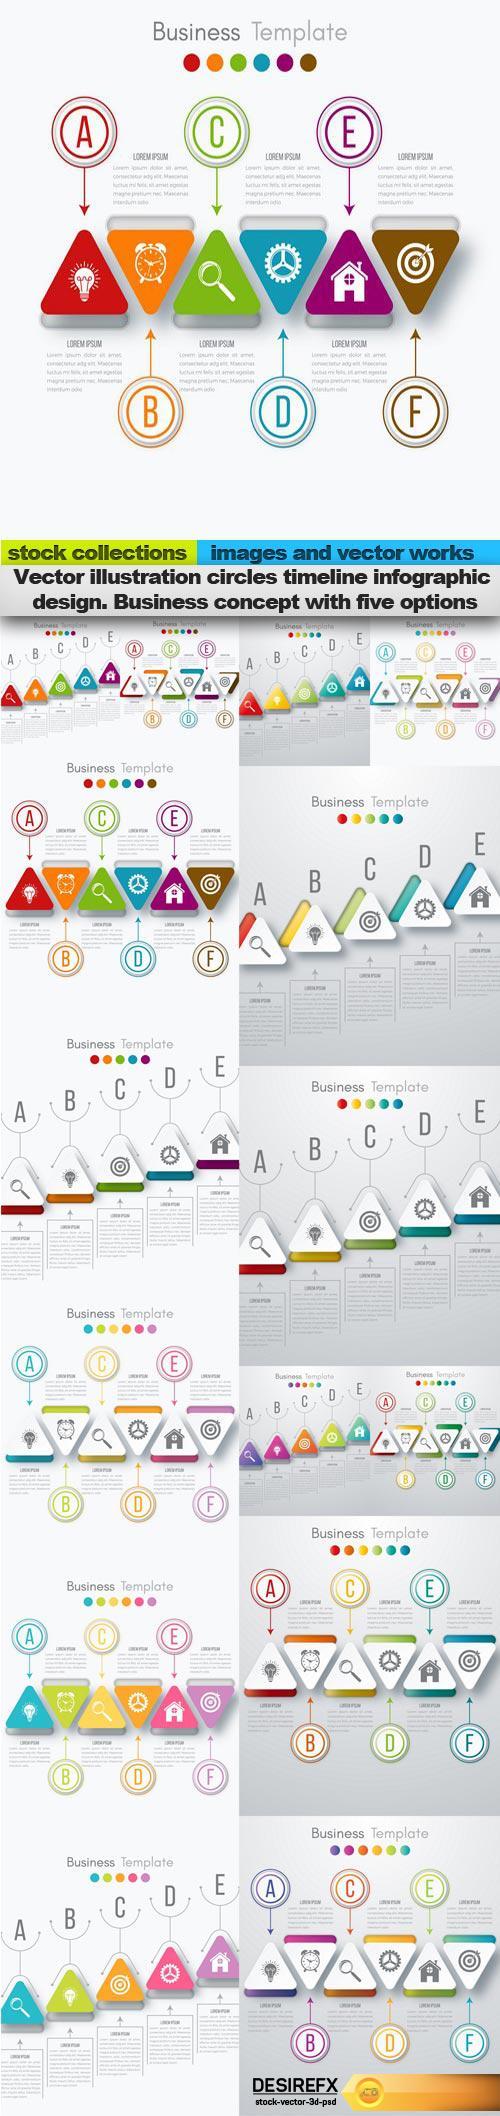 Vector illustration circles timeline infographic design. Business concept with five options, 15 x EPS